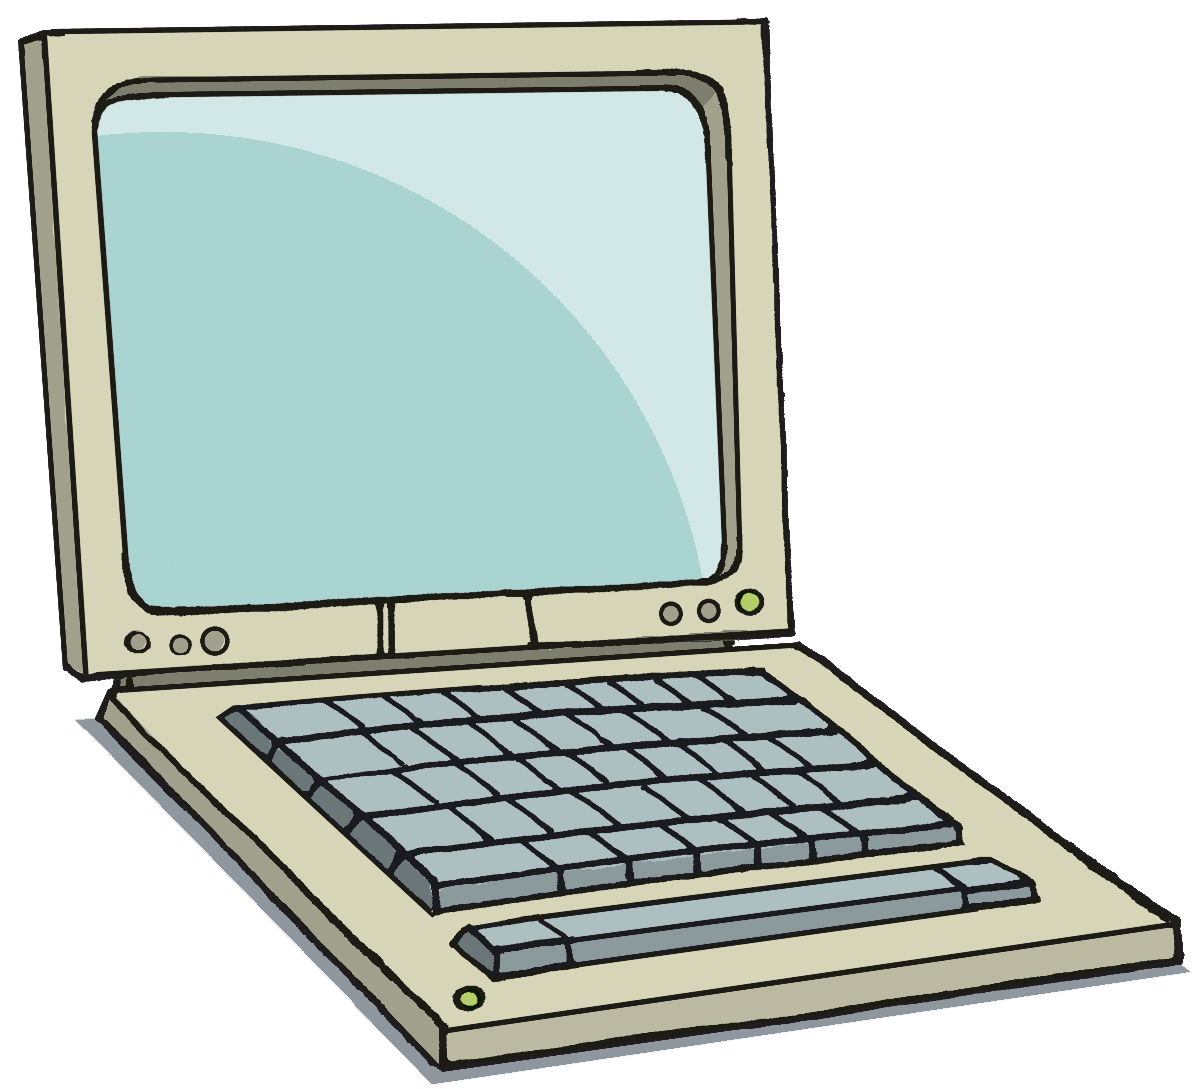 Laptop Clipart Free   Cliparts Co